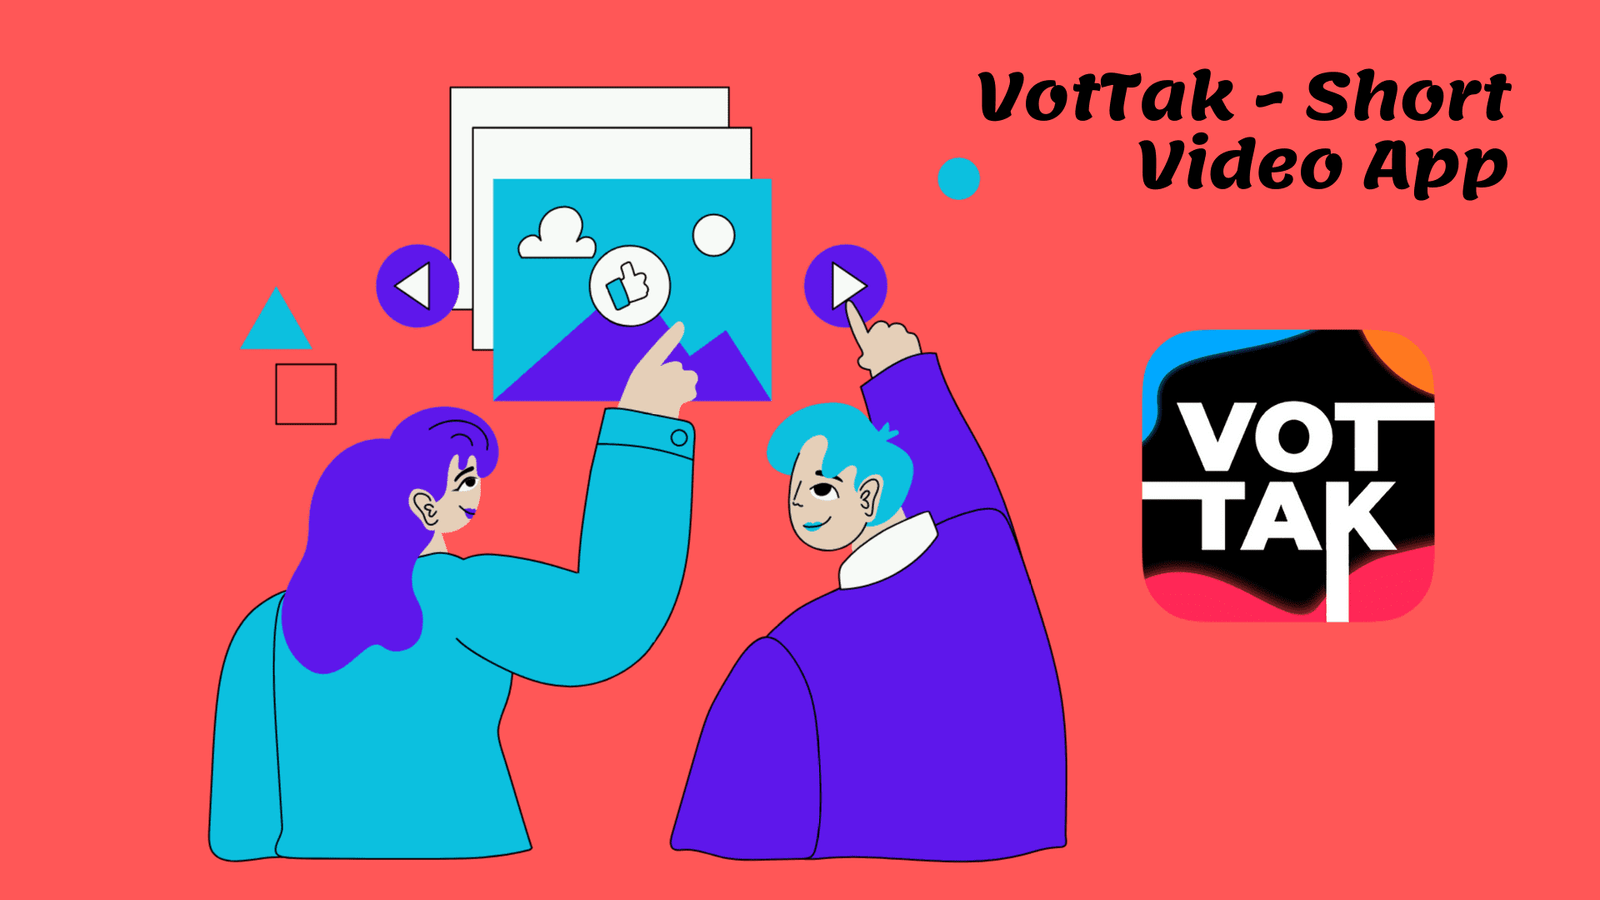 How to Make the Most of the VotTak Short Video App Image